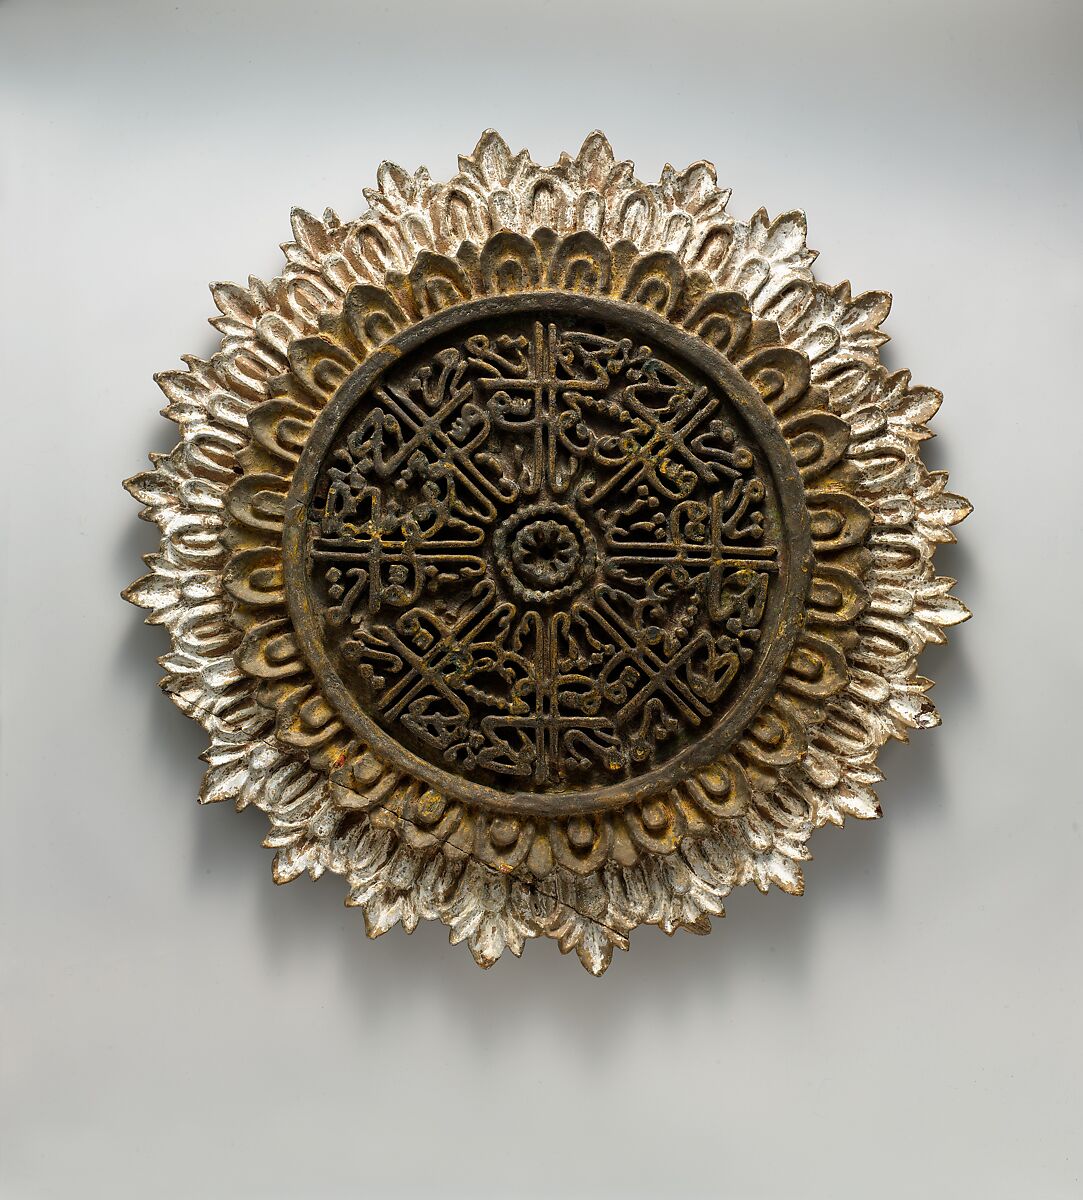 Roundel with Repeated Inscription, Wood, gesso; painted and metal-leafed with gold and silver